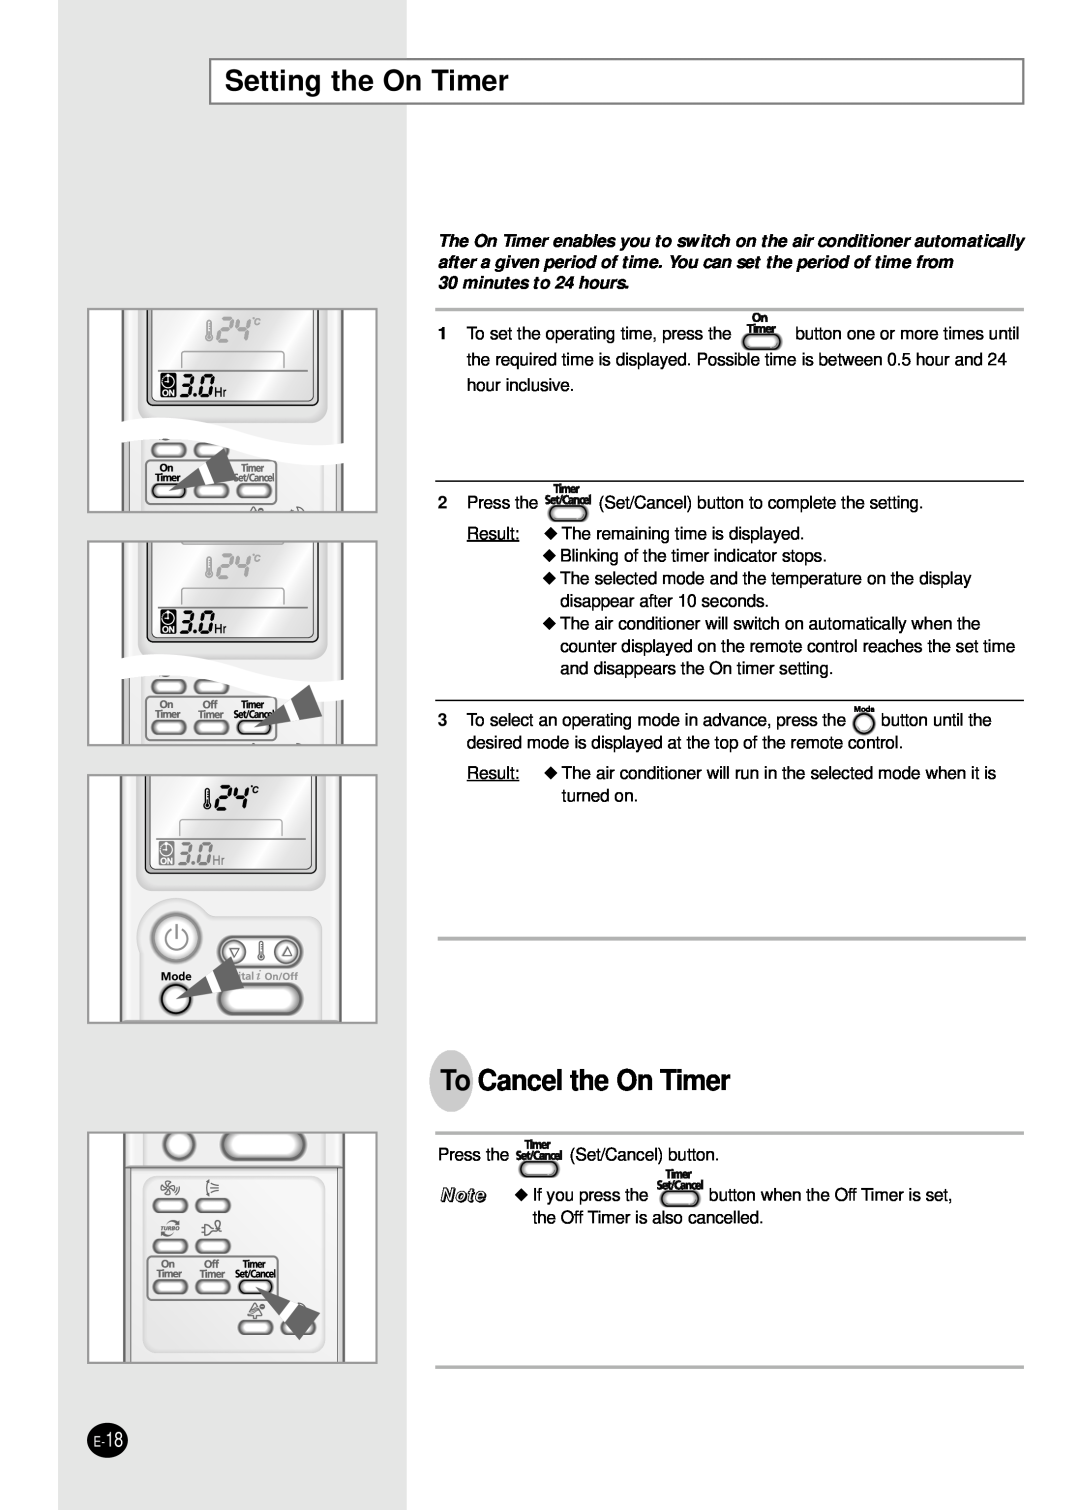 Samsung SH09APGG, SH07APGG, SH07APGAG manual Setting the On Timer, To Cancel the On Timer, minutes to 24 hours 